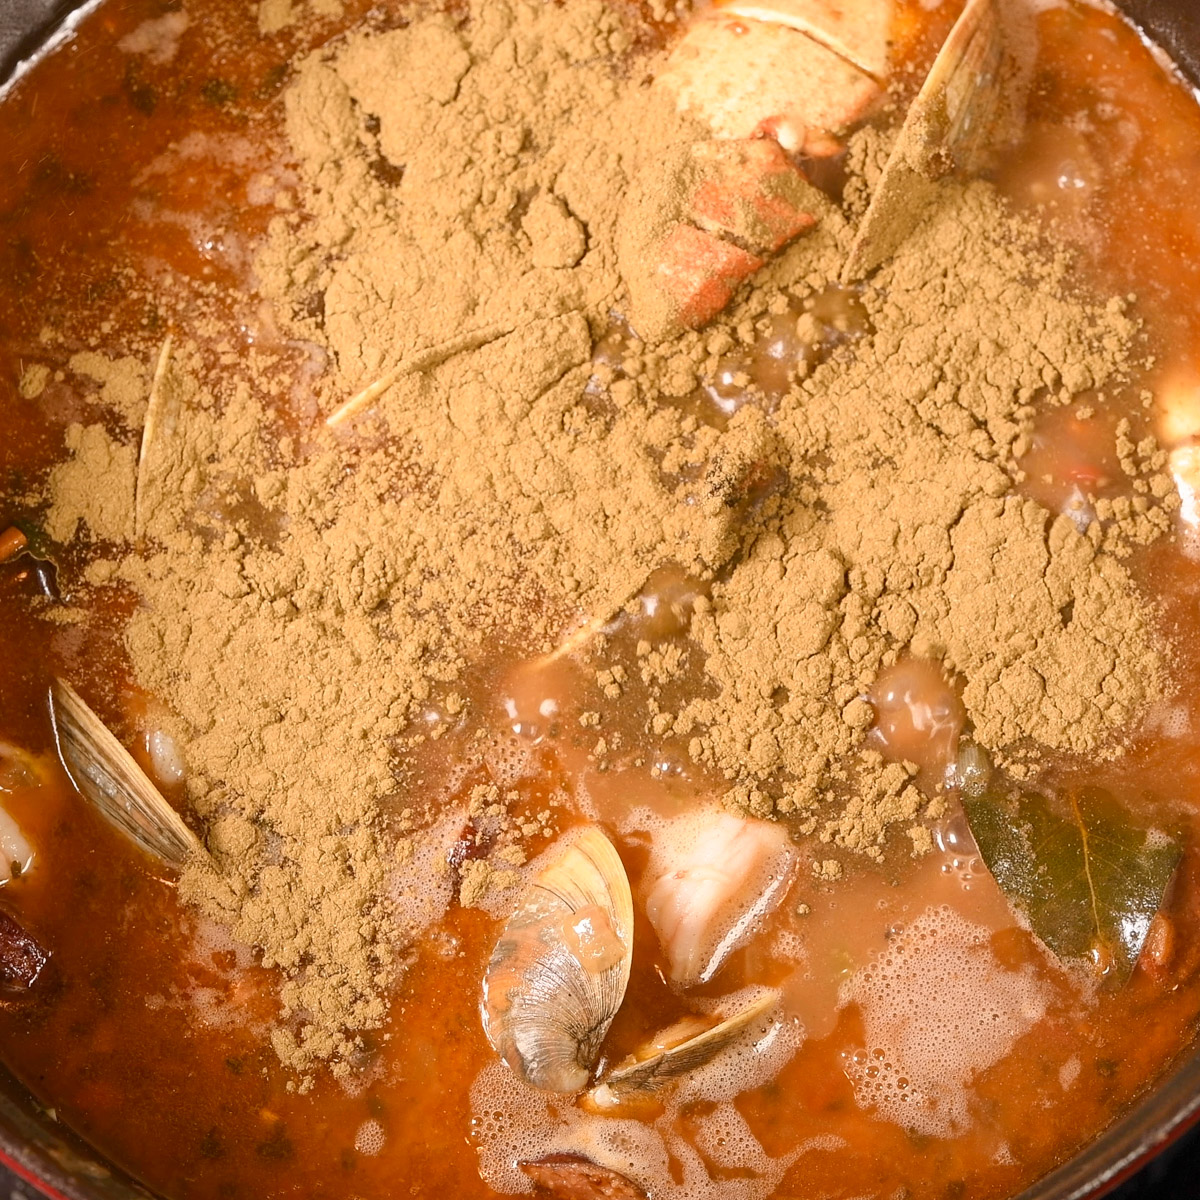 Add the file powder to the gumbo.